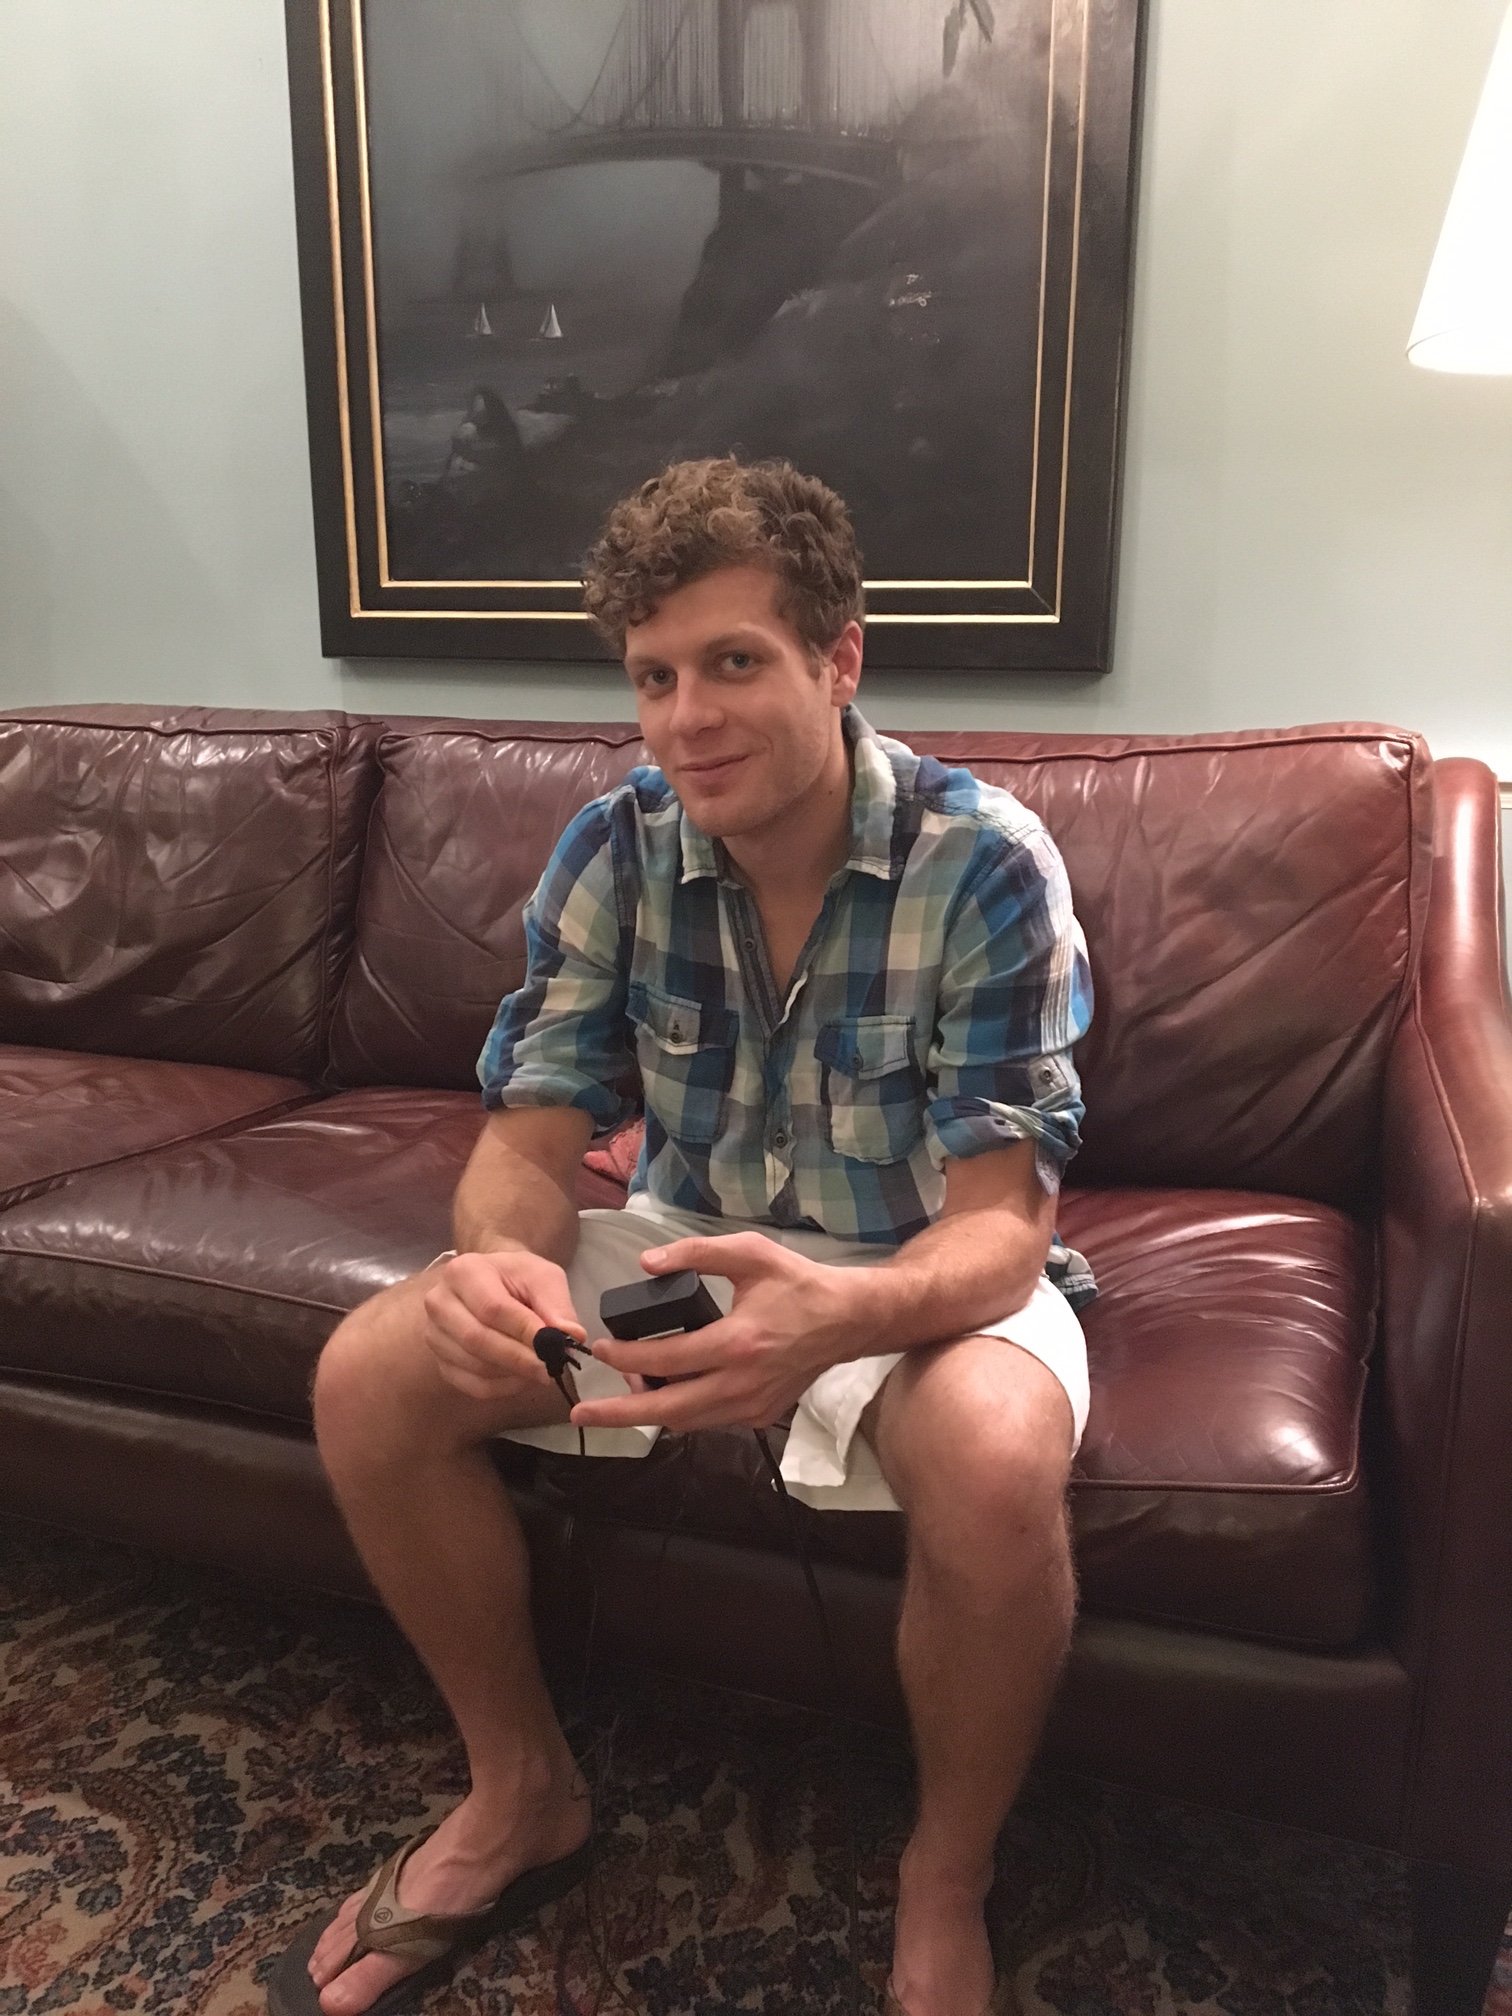 David on couch